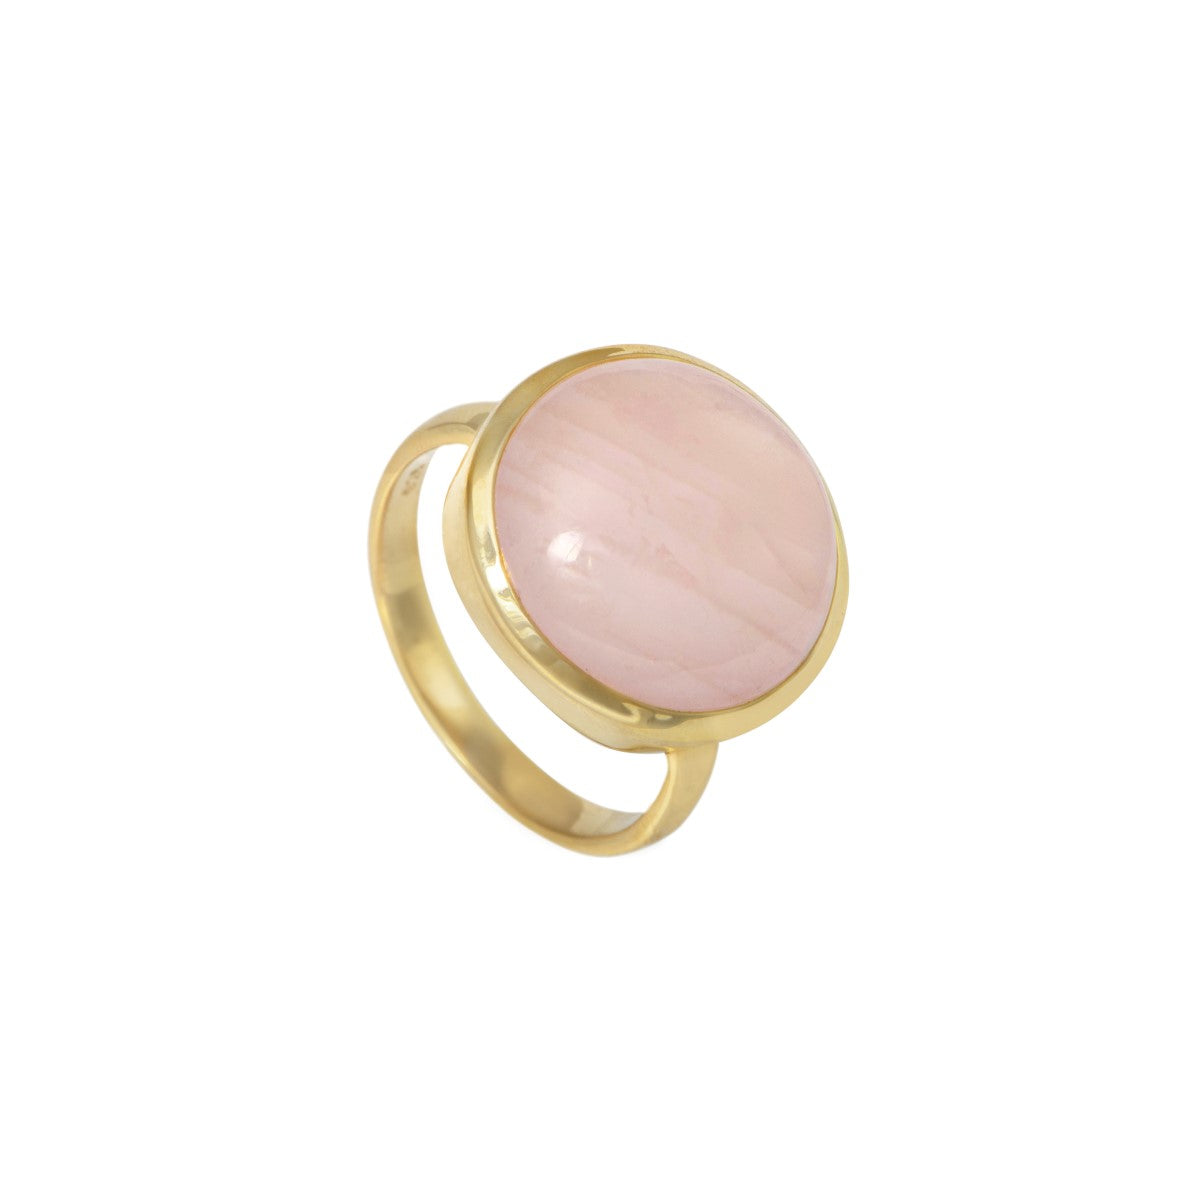 Cabochon Round Cut Natural Gemstone Gold Plated Sterling Silver Ring - Rose Quartz